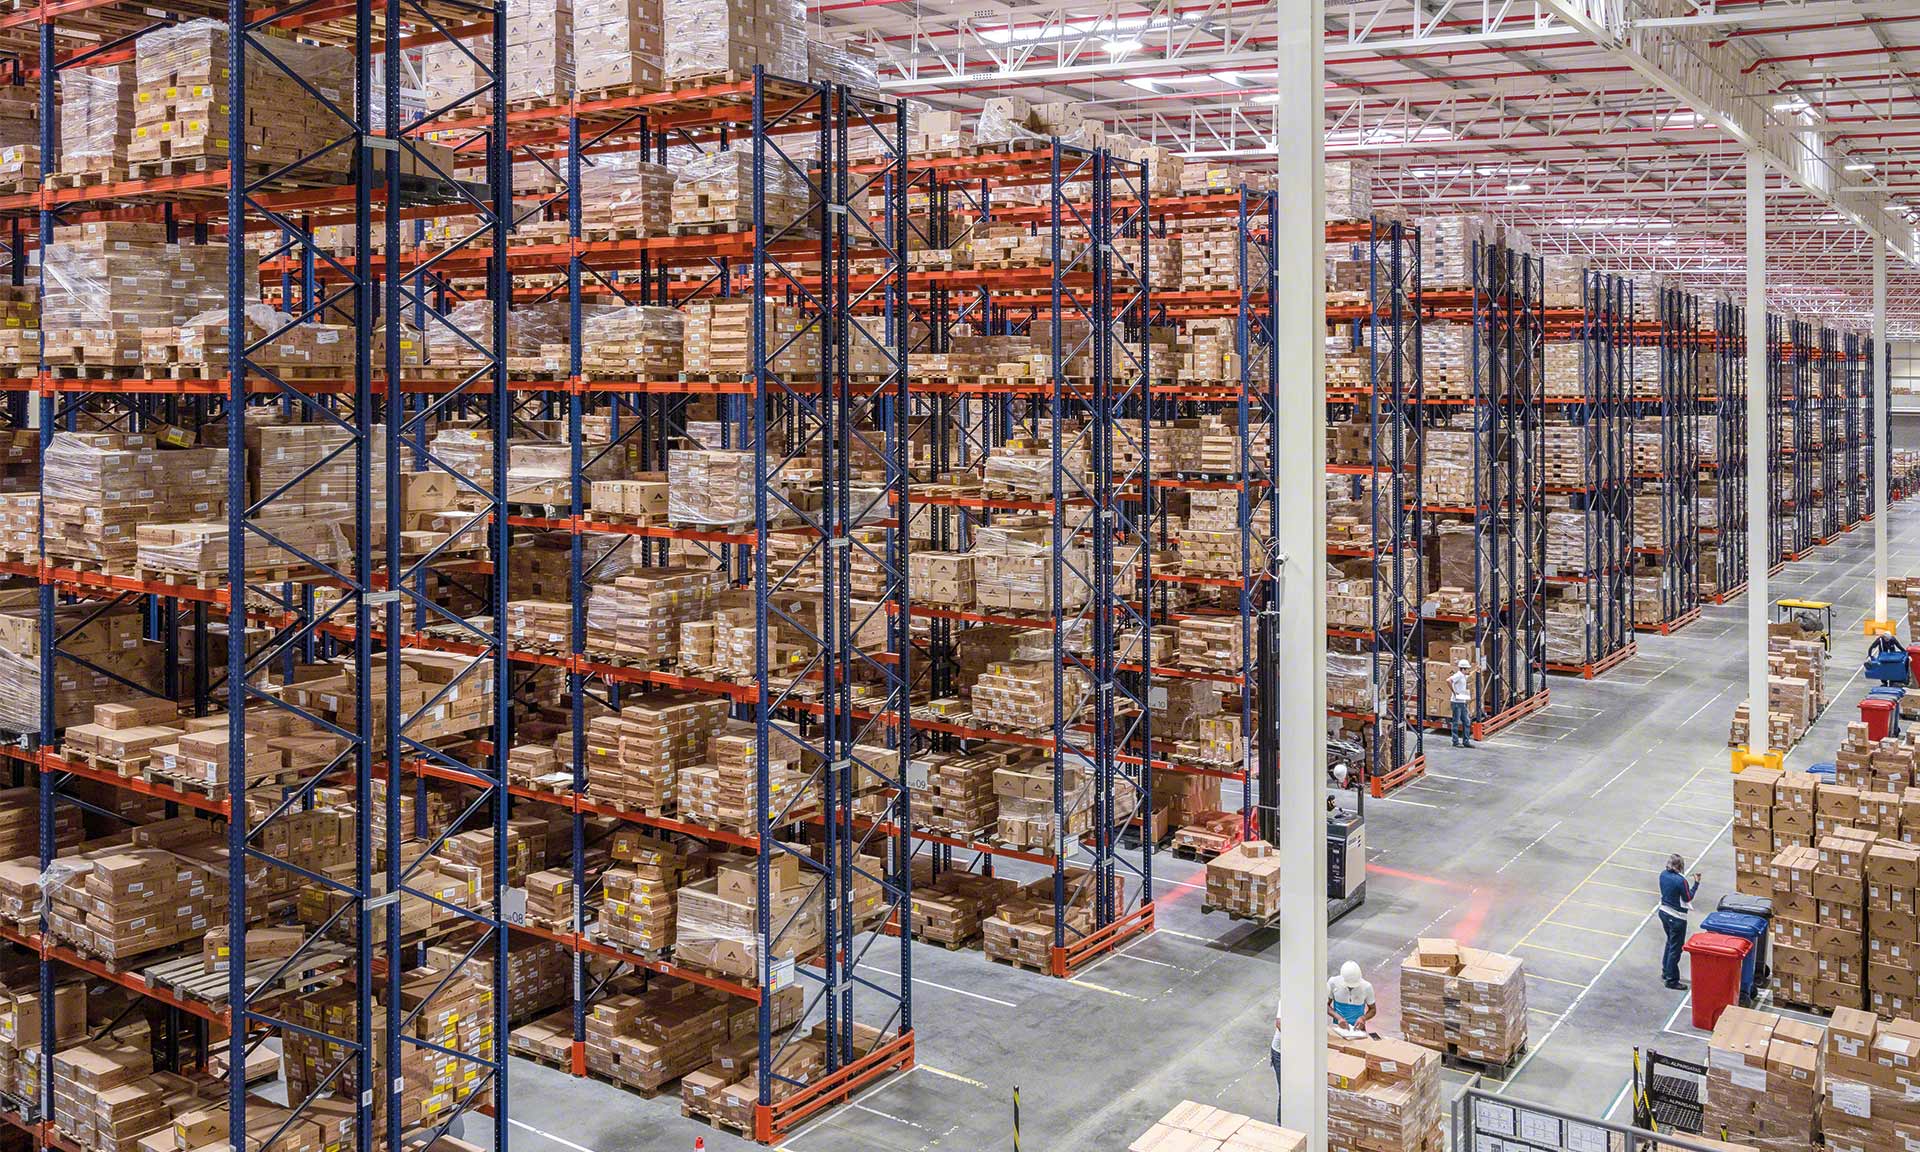 Pallet racking consists of structures designed to hold pallets